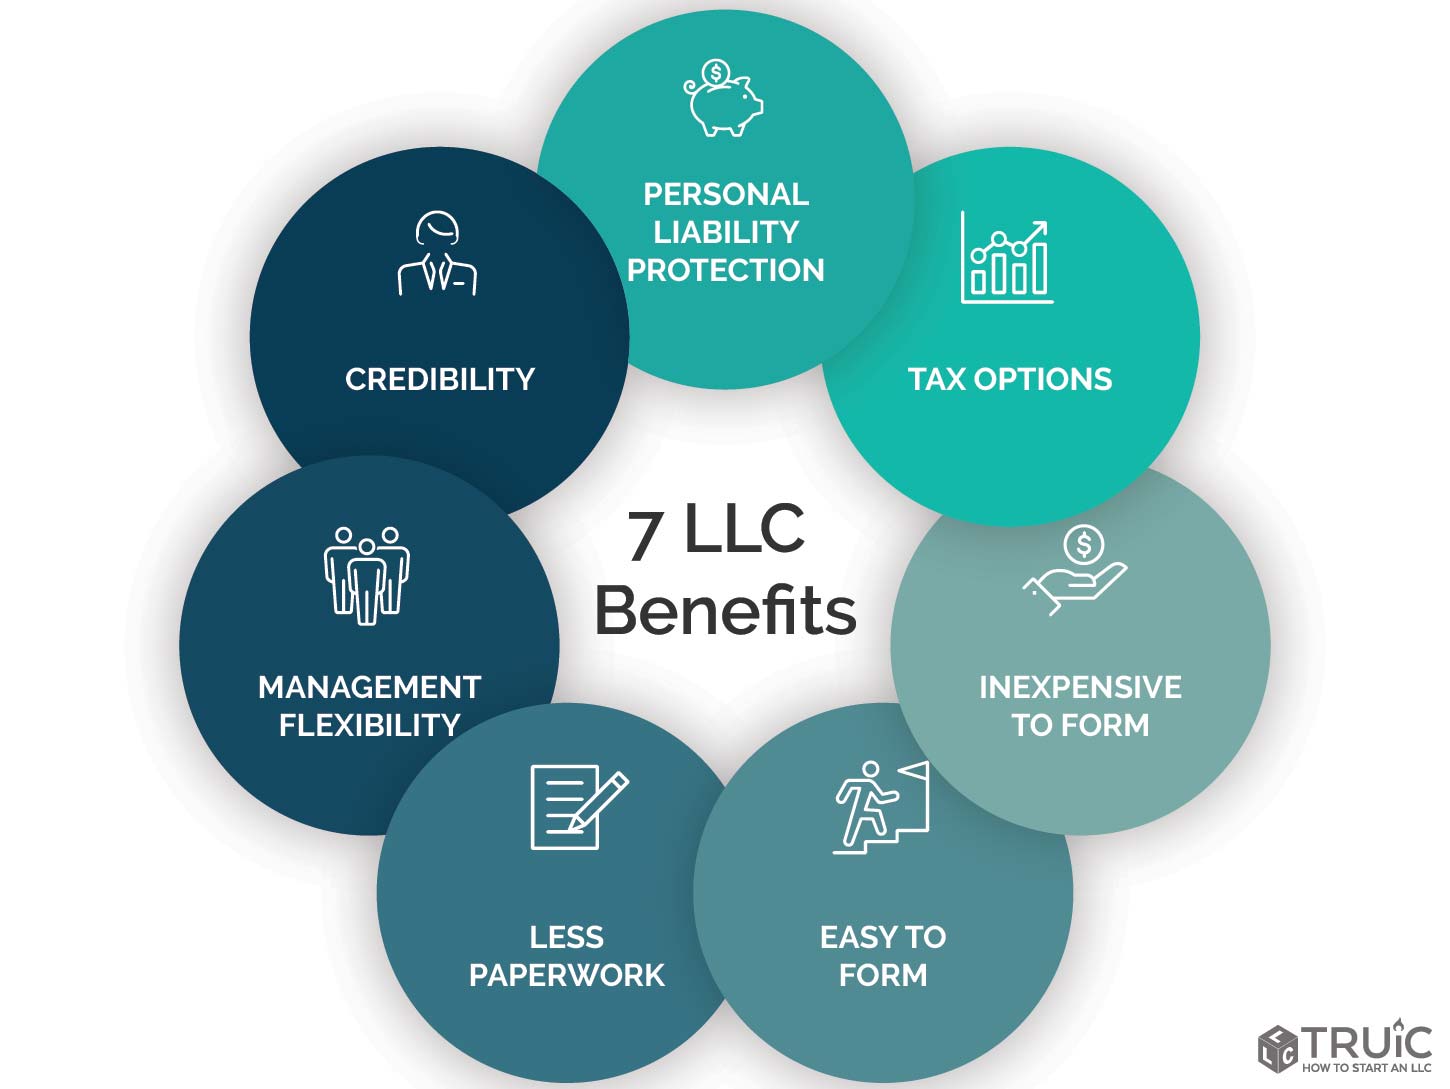 7 LLC Benefits infographic: Personal Liability Protection, Tax Options, Inexpensive to Form, Easy to Form, Less Paperwork, Management Flexibility, and Credibility.